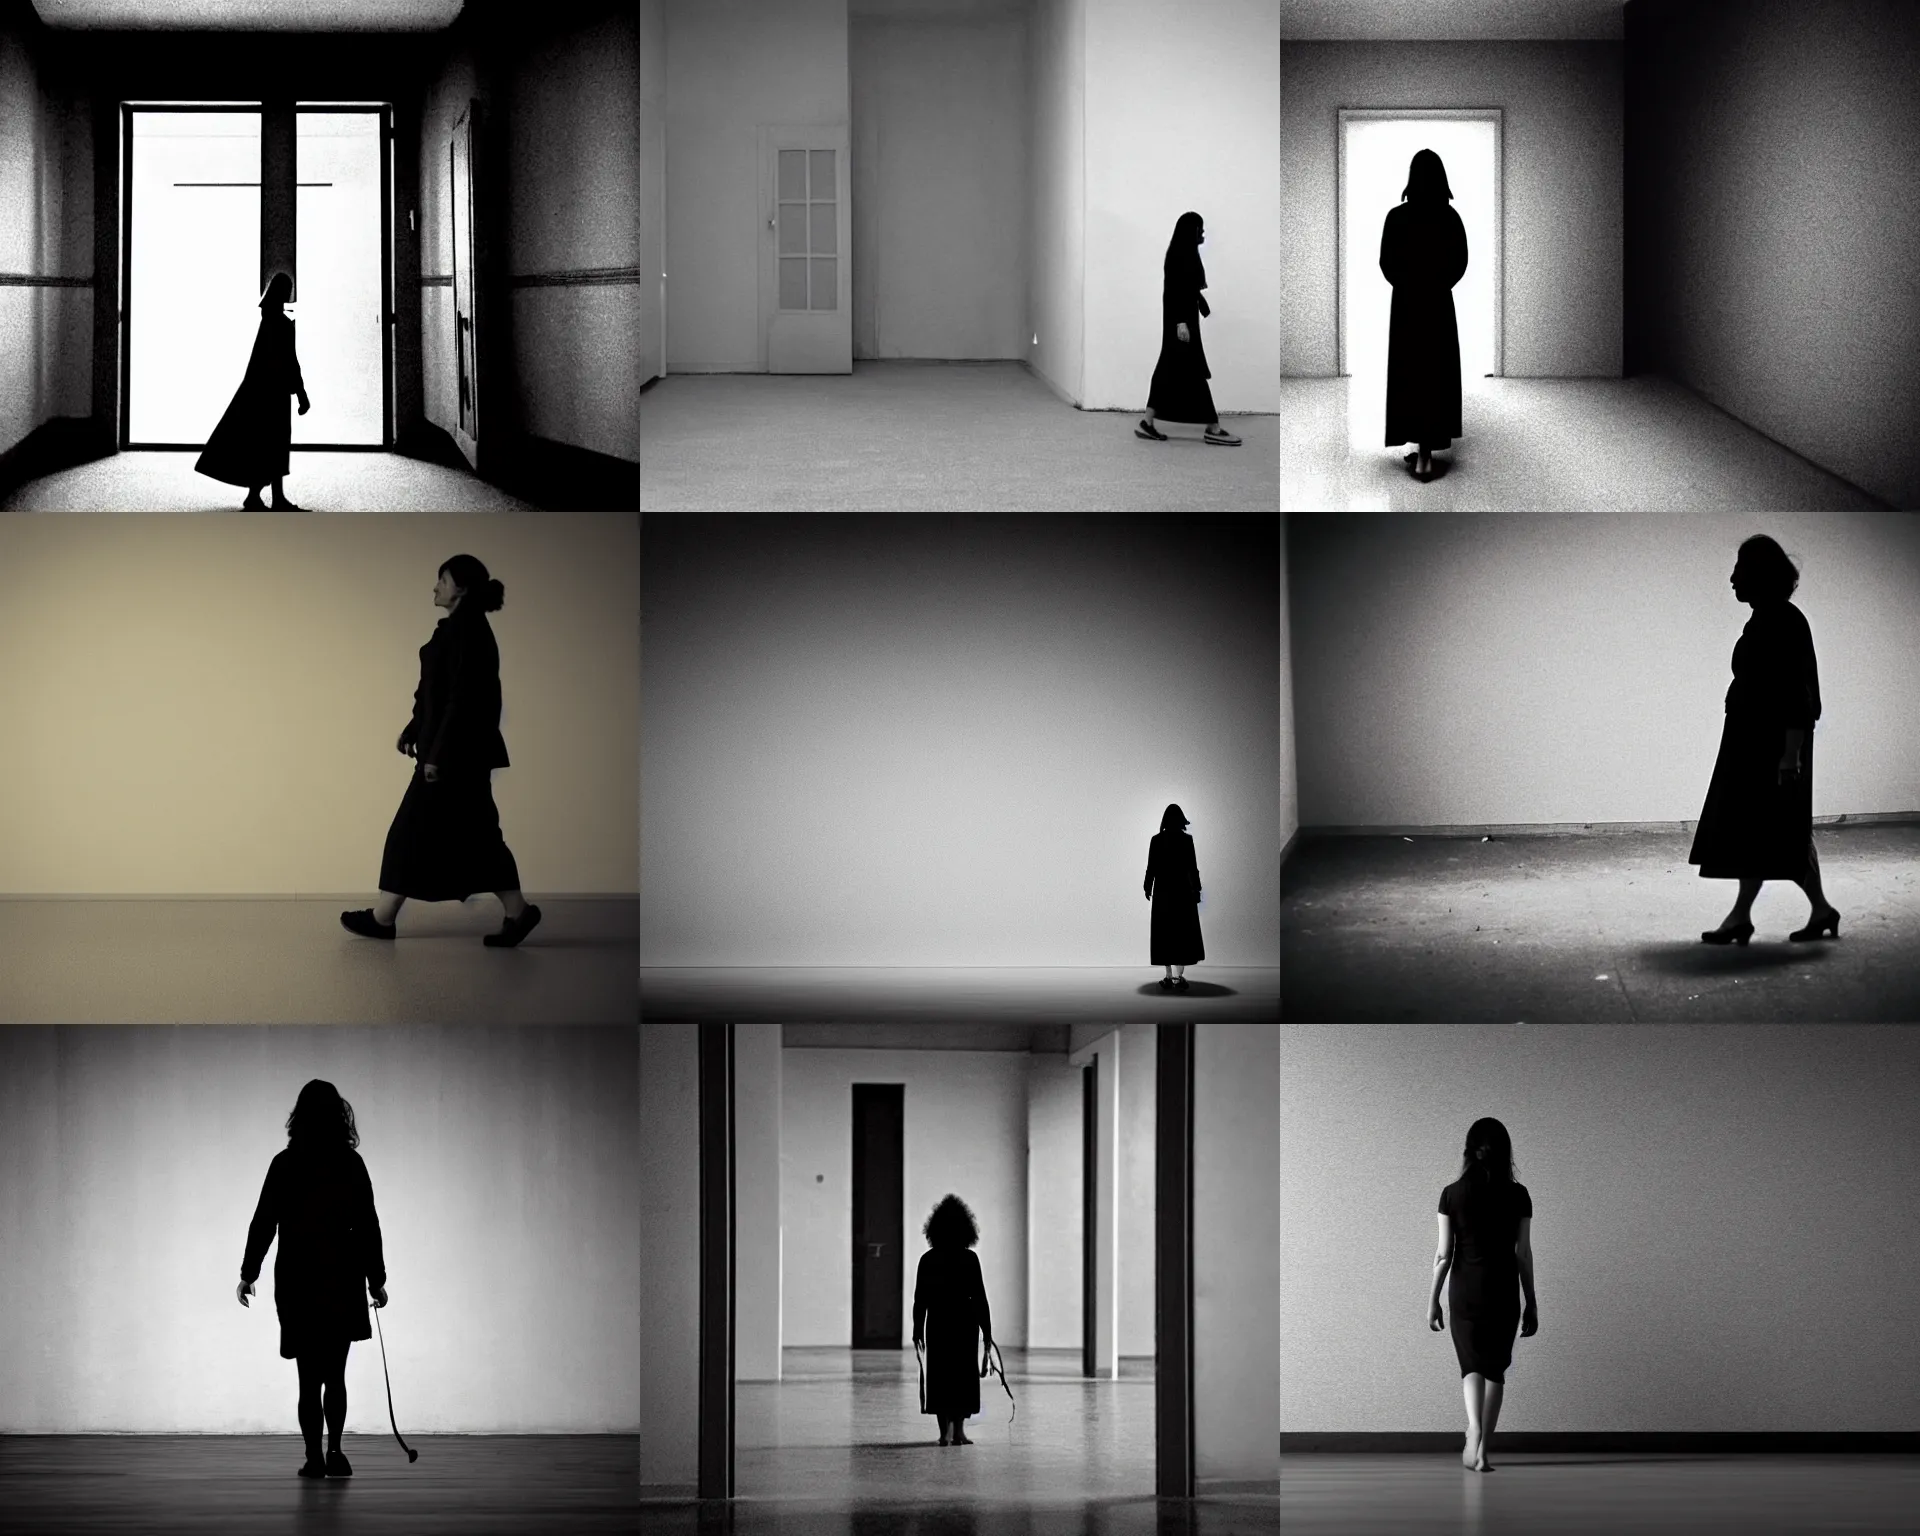 Prompt: Woman walking alone in solitude. The woman is just walking alone through the dark. The woman is alone and waiting for the end of the world. a woman in solitude and contemplation The man is alone in this empty room. The woman is solitary and waiting for godot The solitary woman with the empty cabinet is a reflection of the isolation of man